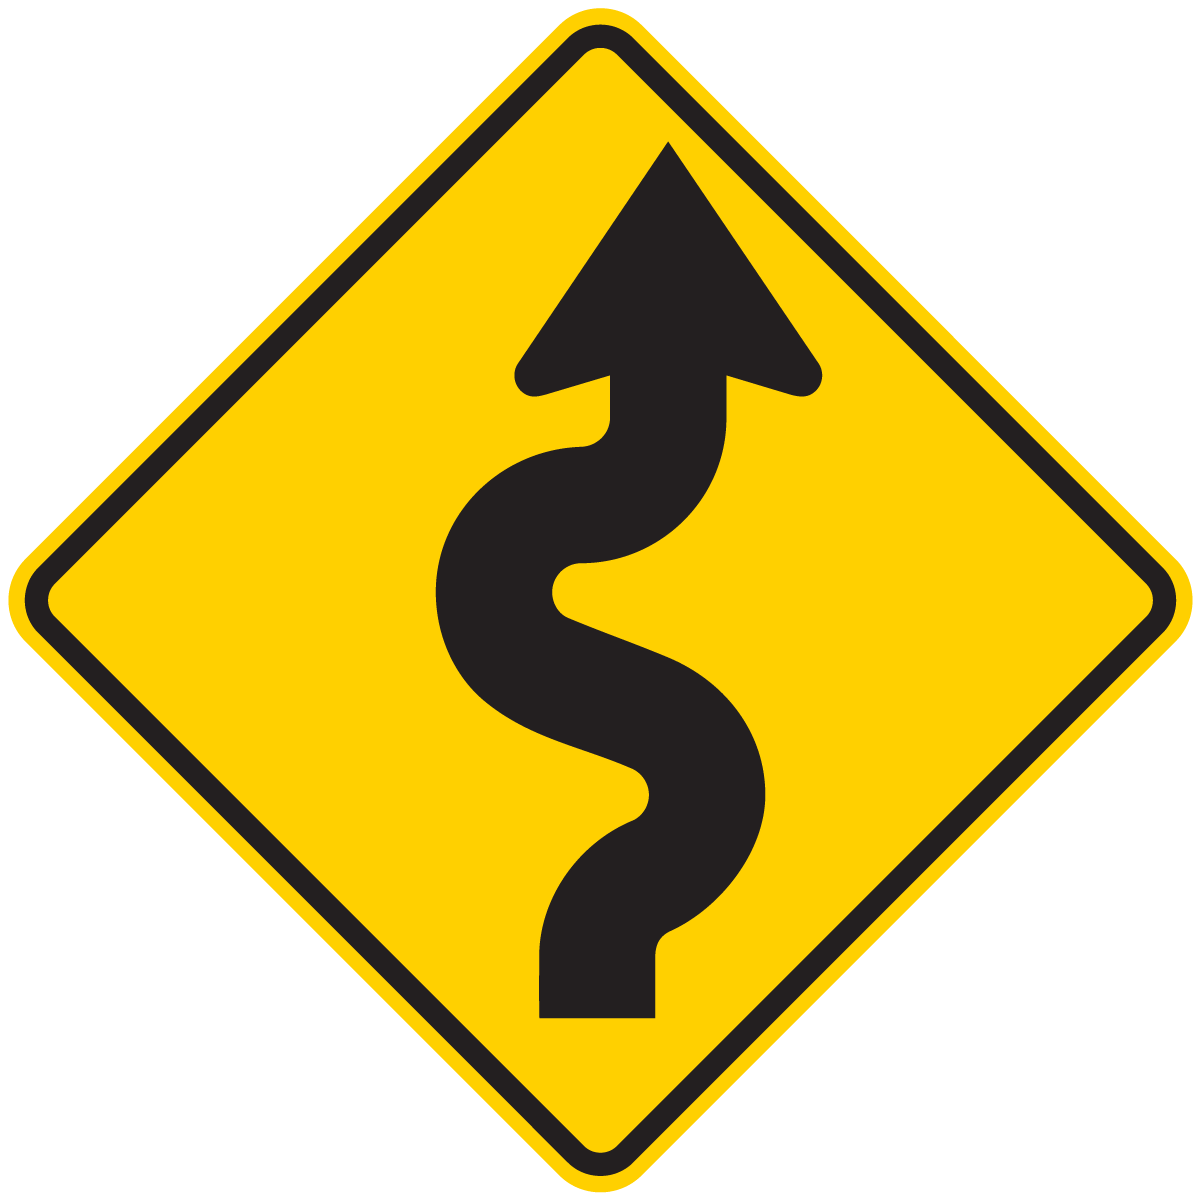 W1-5 Winding Road (Left or Right)